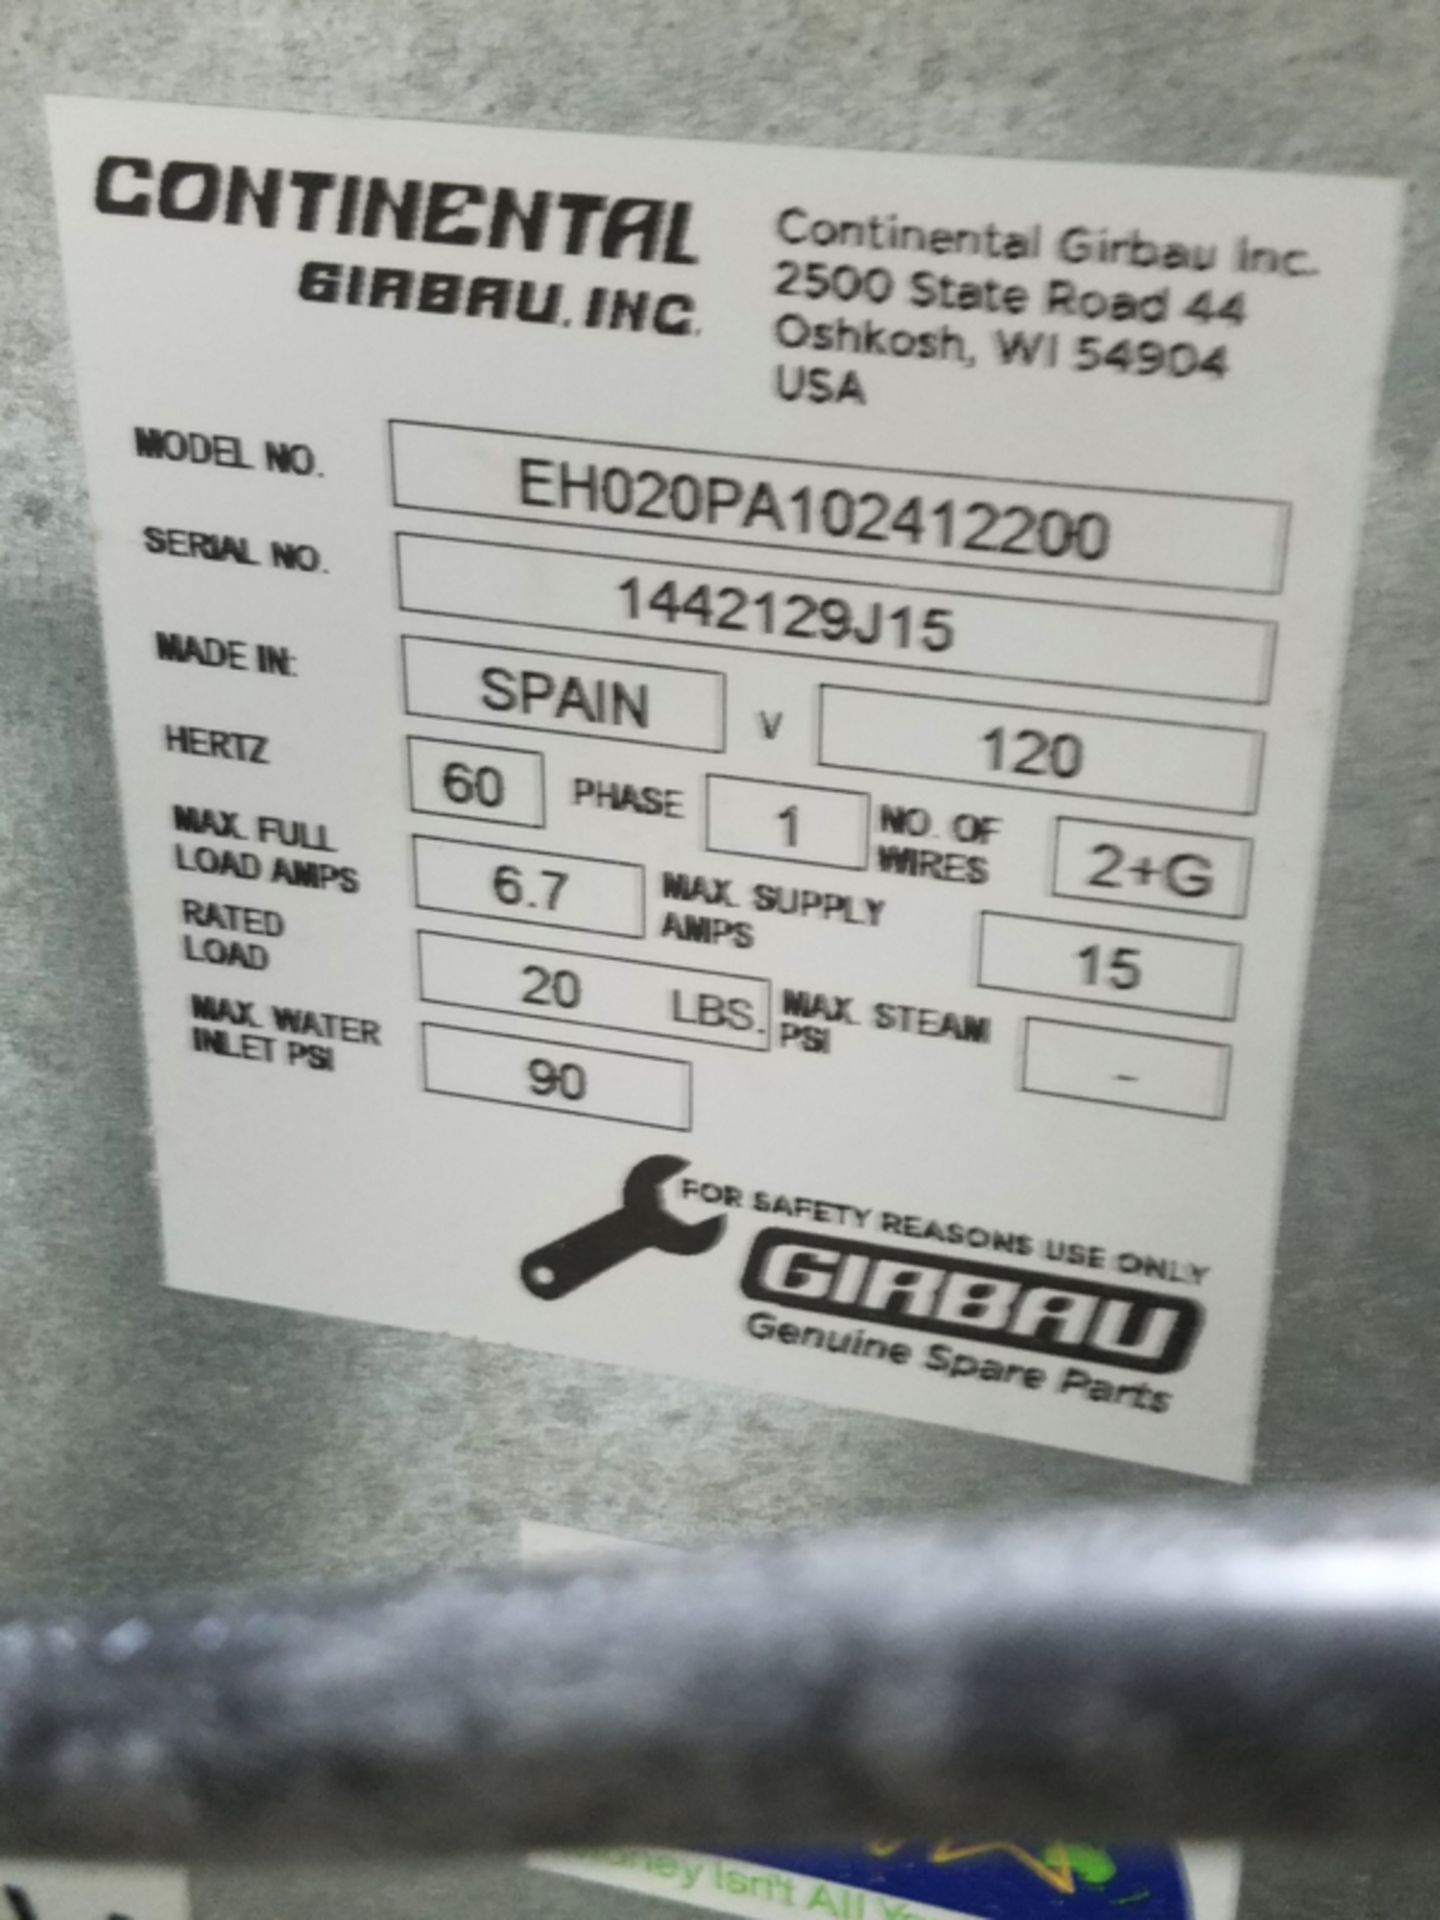 Continental Girbau Inc. Front Load Washer, M# EH020PA102412200, S/N 1442129J15 | Location: Mixing/ - Image 2 of 2